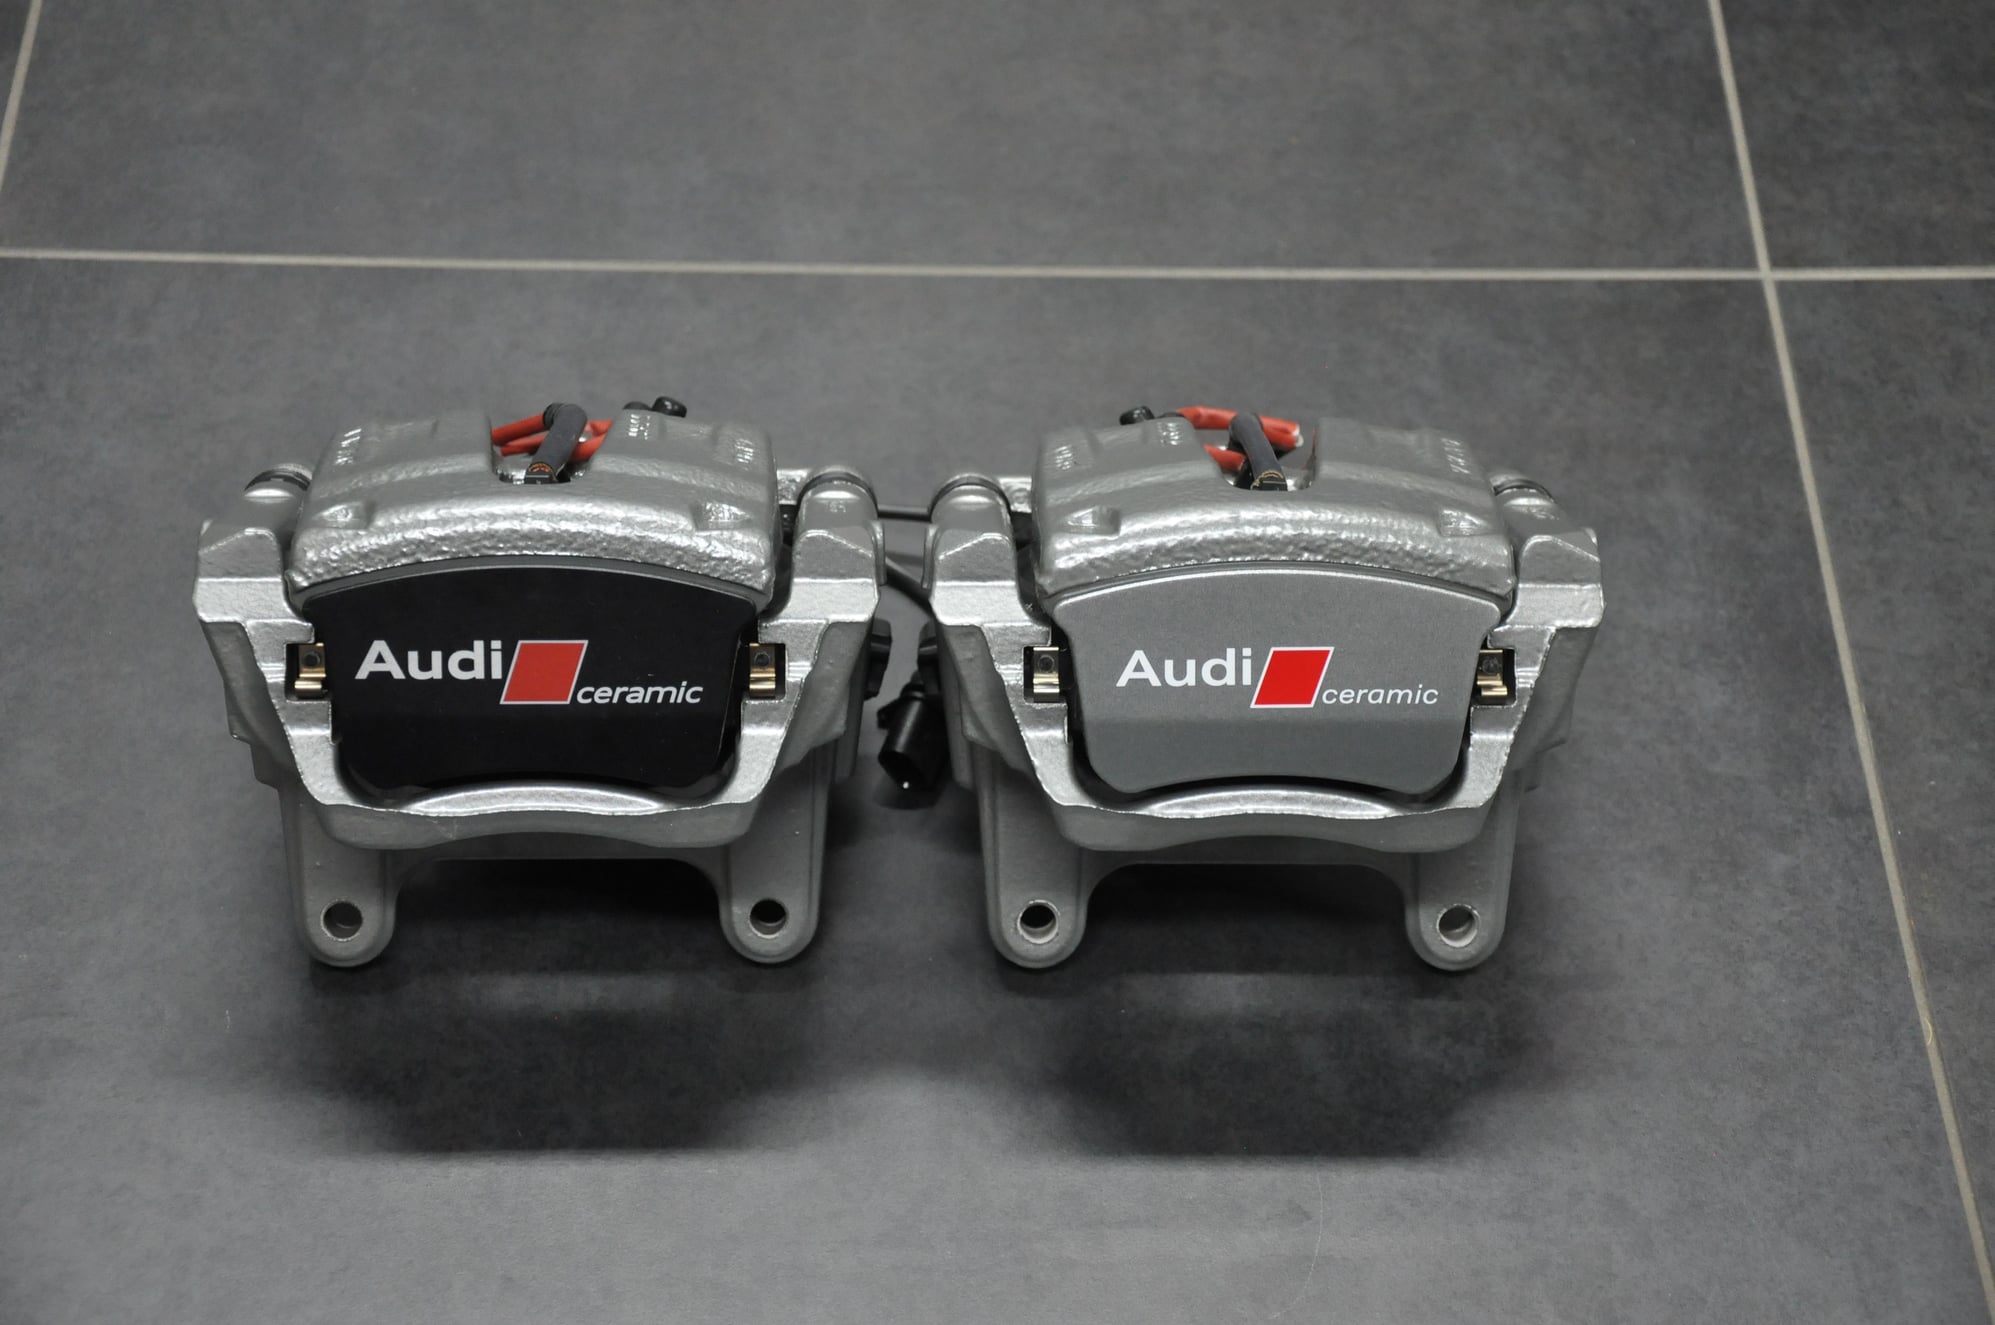 Brakes - Audi RS6, RS7 C8, RSQ8 Rear Color Matched Caliper Covers for Steel... - New - All Years  All Models - All Years  All Models - All Years  All Models - All Years  All Models - All Years  All Models - All Years  All Models - Eu, Slovenia